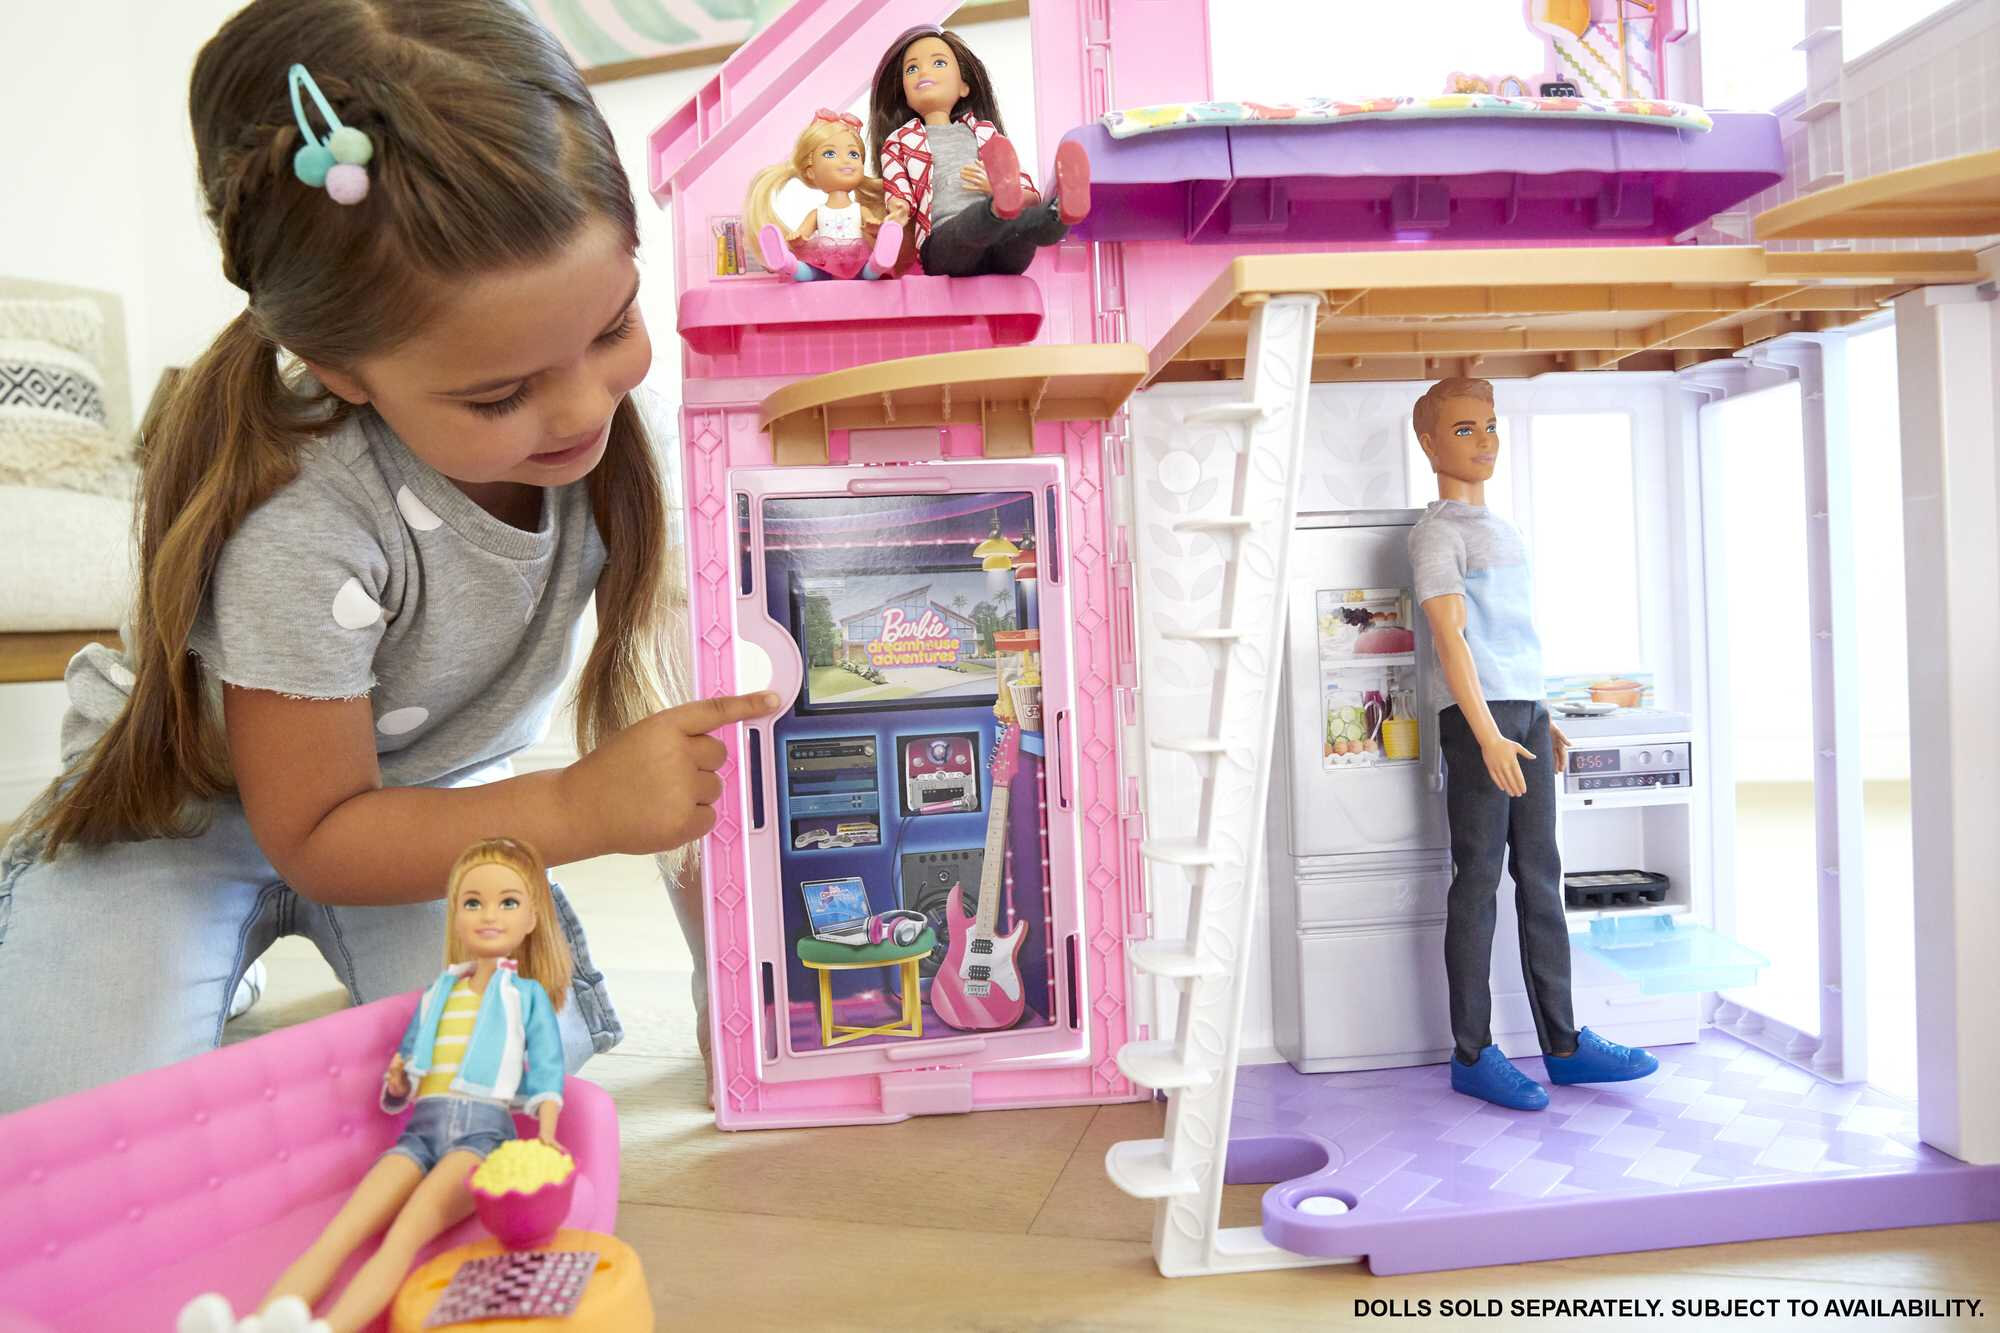 Barbie Malibu House Dollhouse Playset with 25+ Furniture and Accessories (6 Rooms) - image 3 of 8